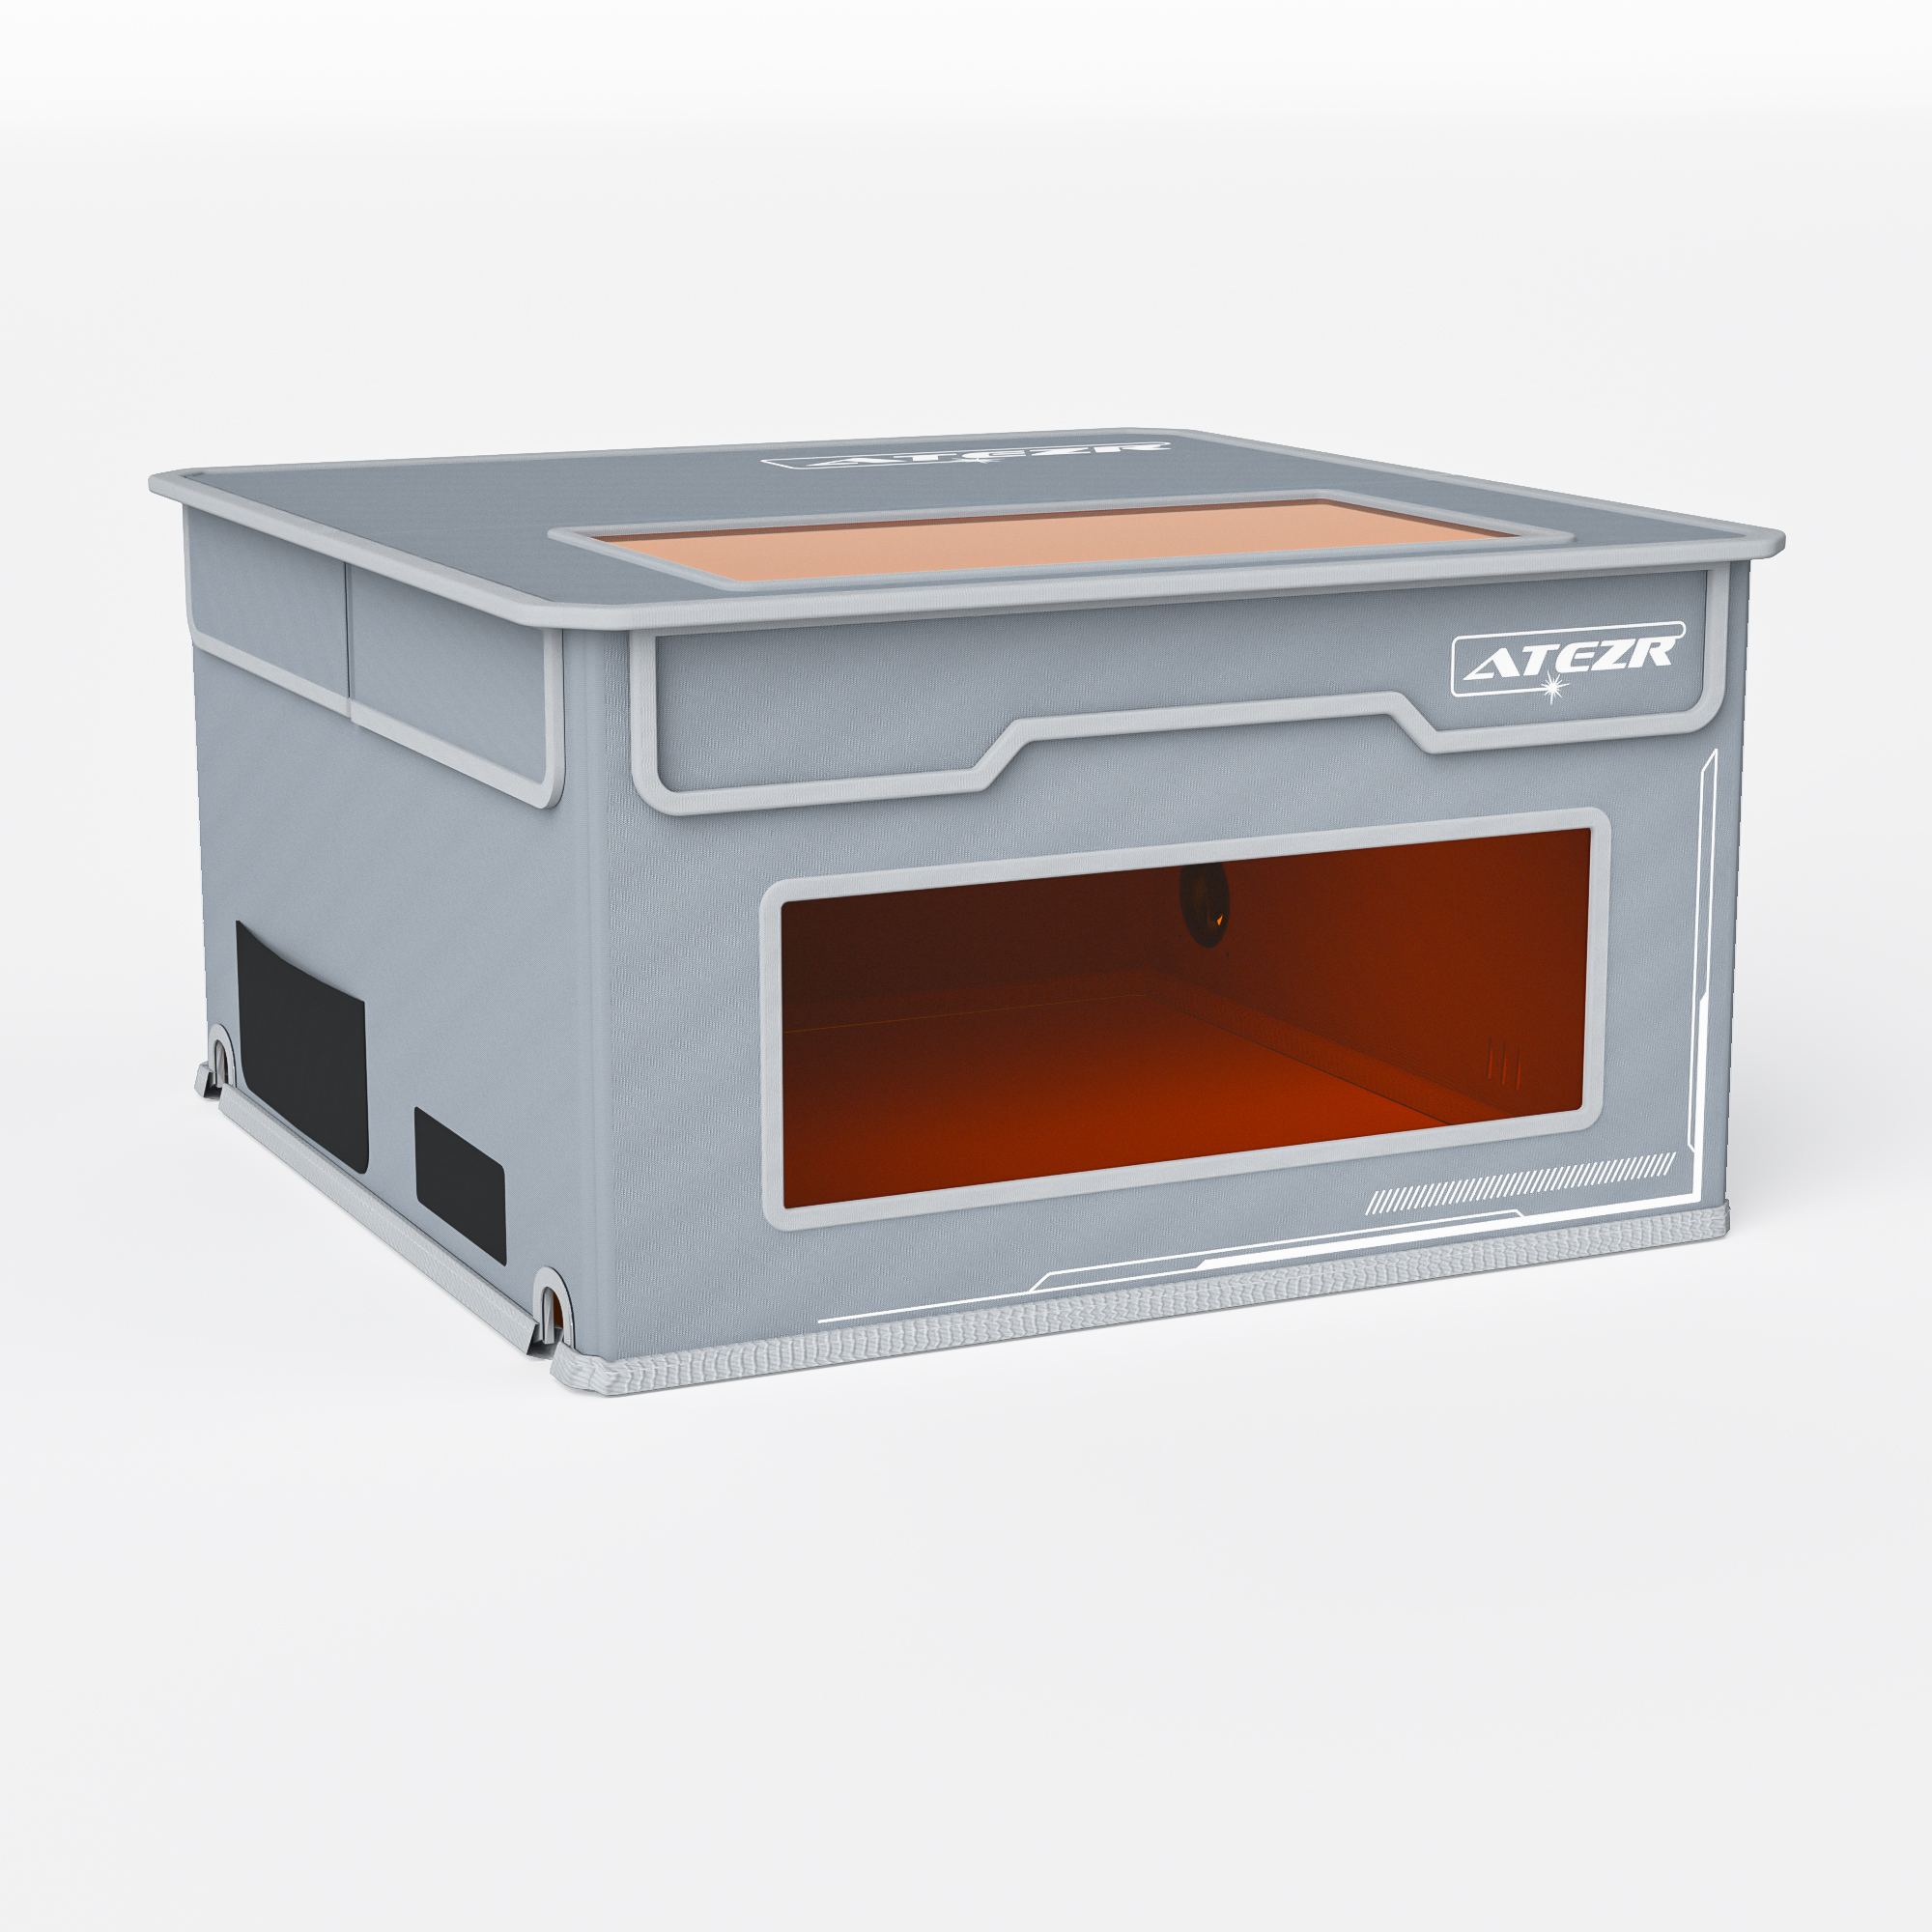 Atezr AS Foldable Enclosure Smoke-proof Cover for all Laser Engraver [Pre-Order]